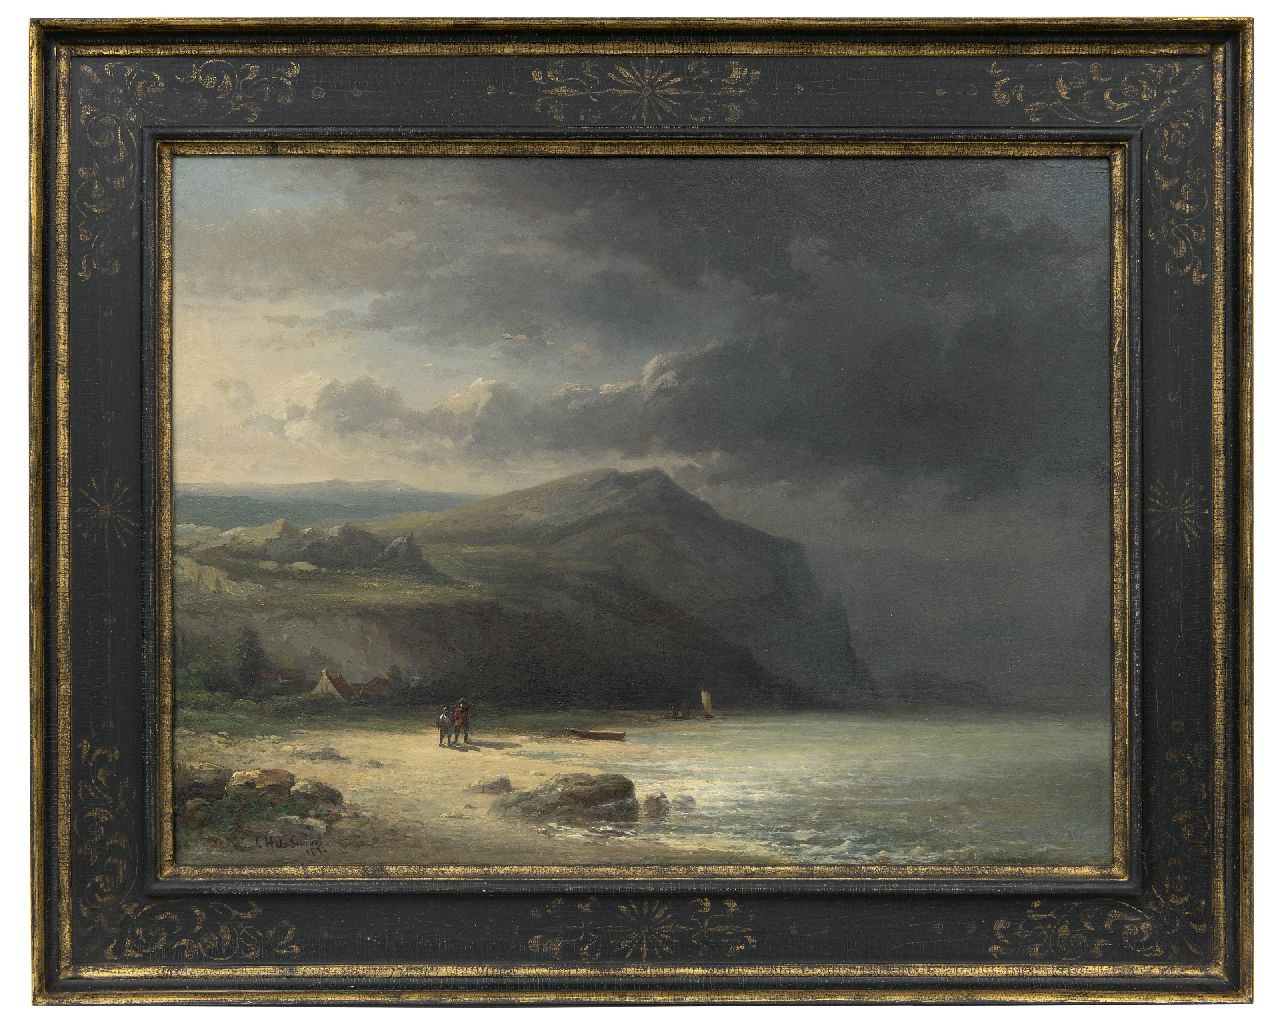 Swart C.H. de | Corstiaan Hendrikus de Swart | Paintings offered for sale | Land folk on the beach with approaching storm, oil on panel 45.3 x 59.7 cm, signed l.l. and dated 1871